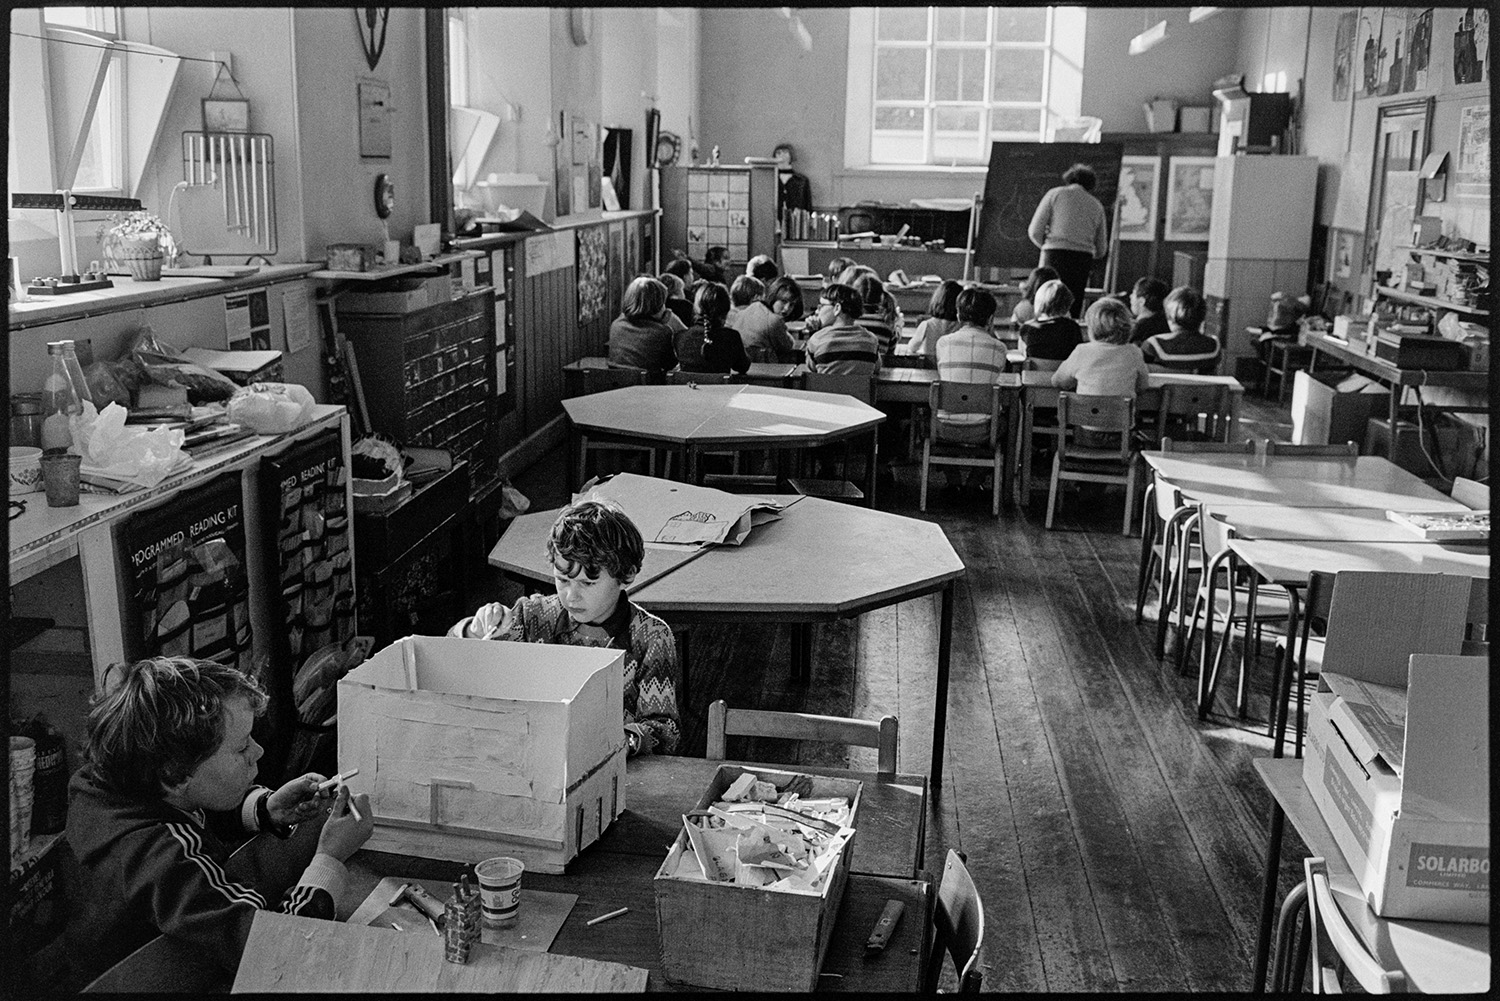 Primary school classroom with children listening to radio schools broadcast and working. 
[A teacher writing on a blackboard in a classroom at Burrington Primary School. Children are sitting and watching. Two children in the foreground are making a house from a cardboard box.]